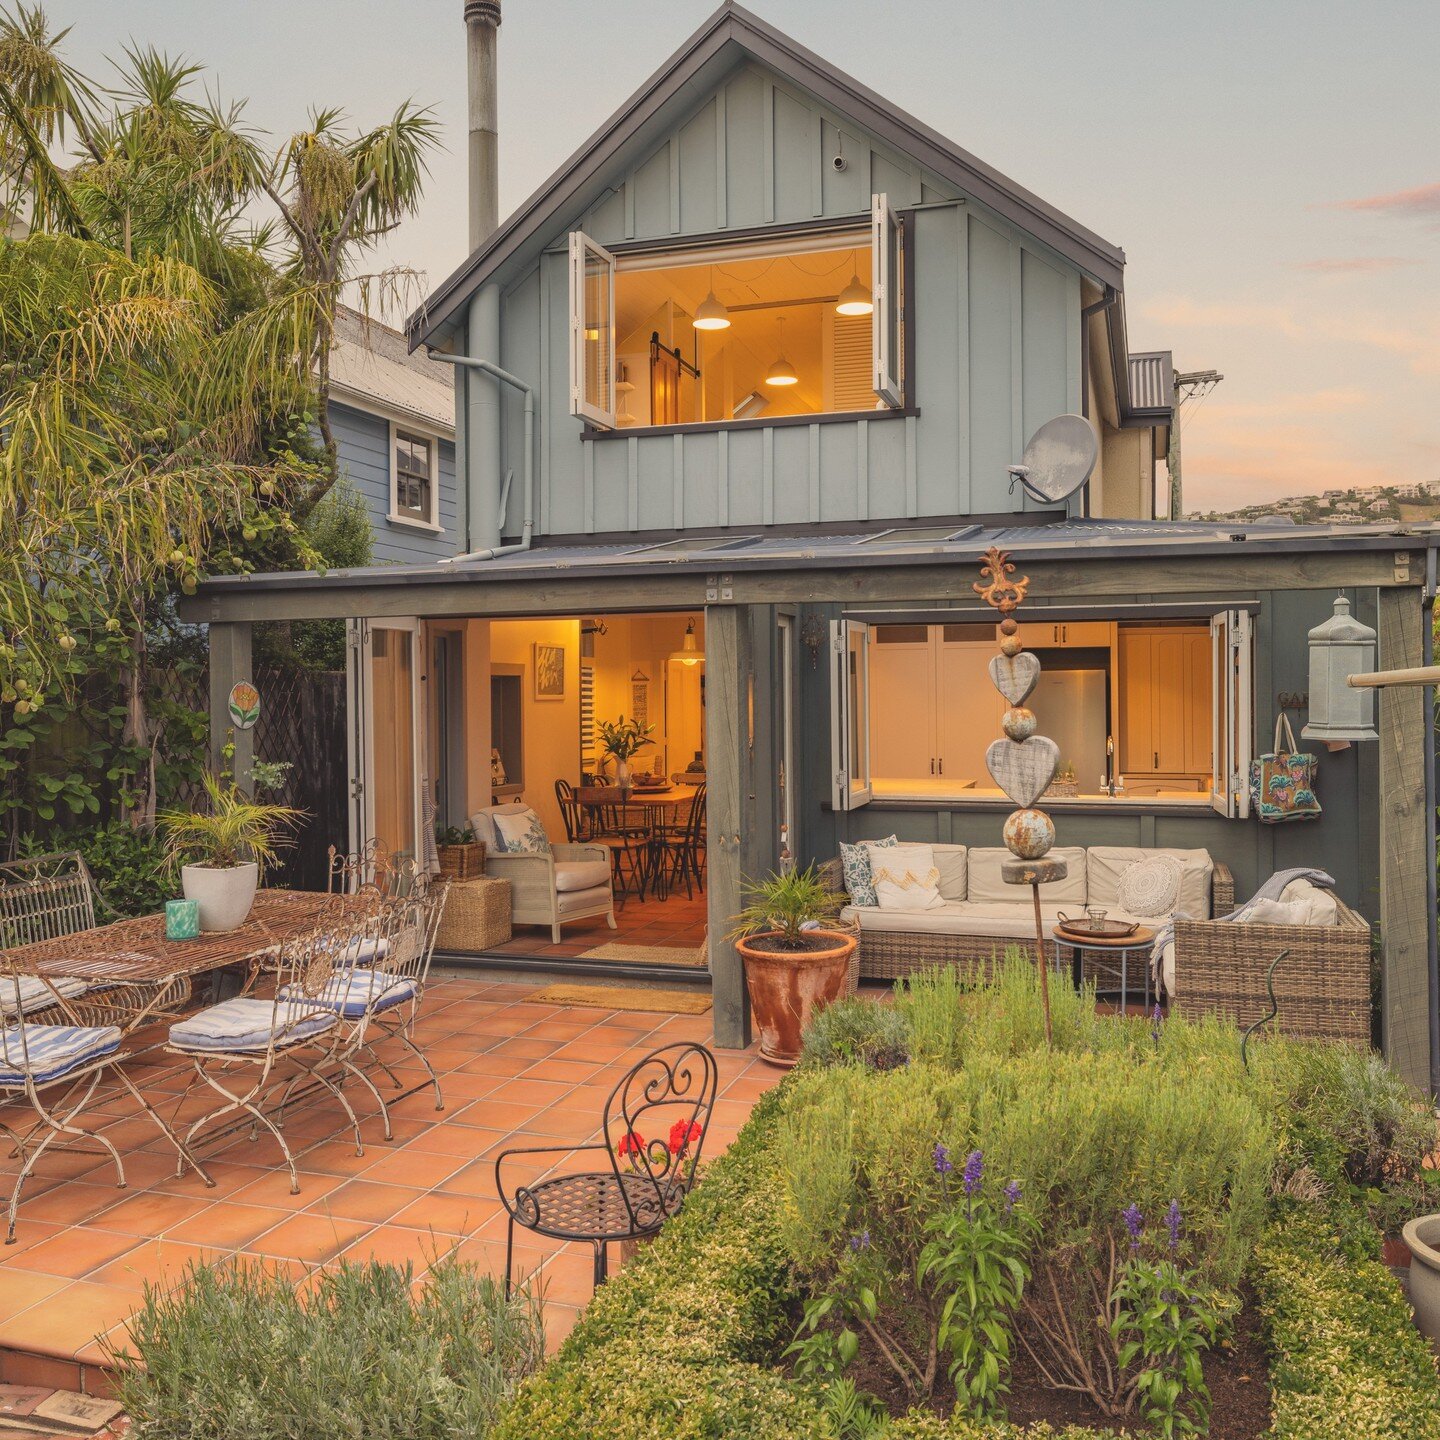 Live, Laugh, Love
4 Stoke Street, Sumner
homechch.co.nz
Experience the Sea la Vie&rsquo; of in this alluring HOME, situated a minute's walk away from Sumner Beach, in the most ideal location. This renovated property beautifully merges modern design w